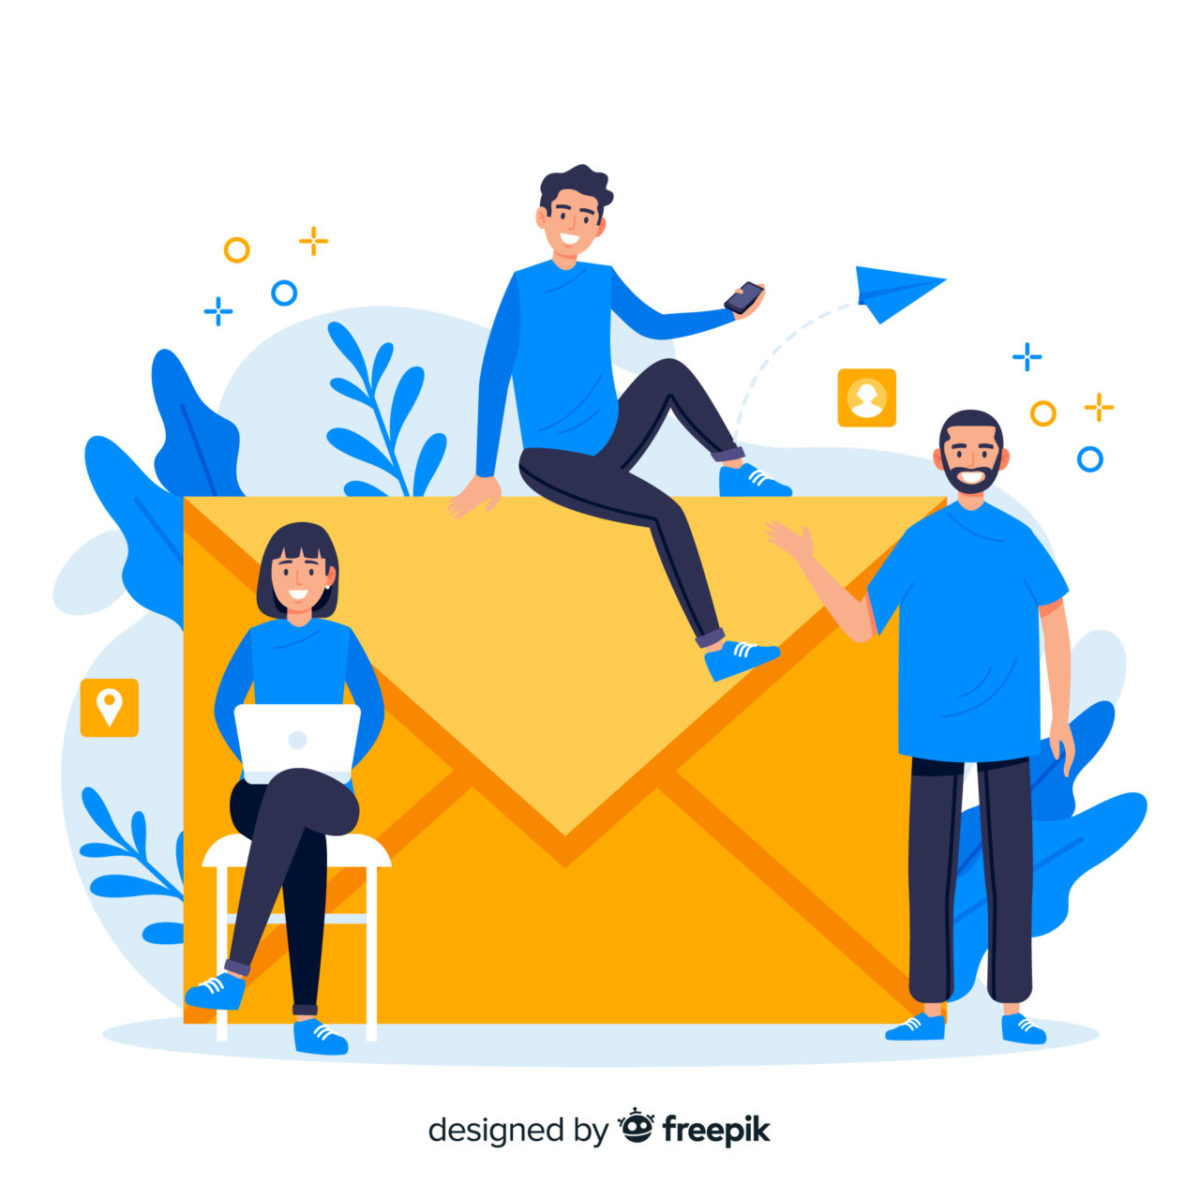 mail-illustration-with-three-people